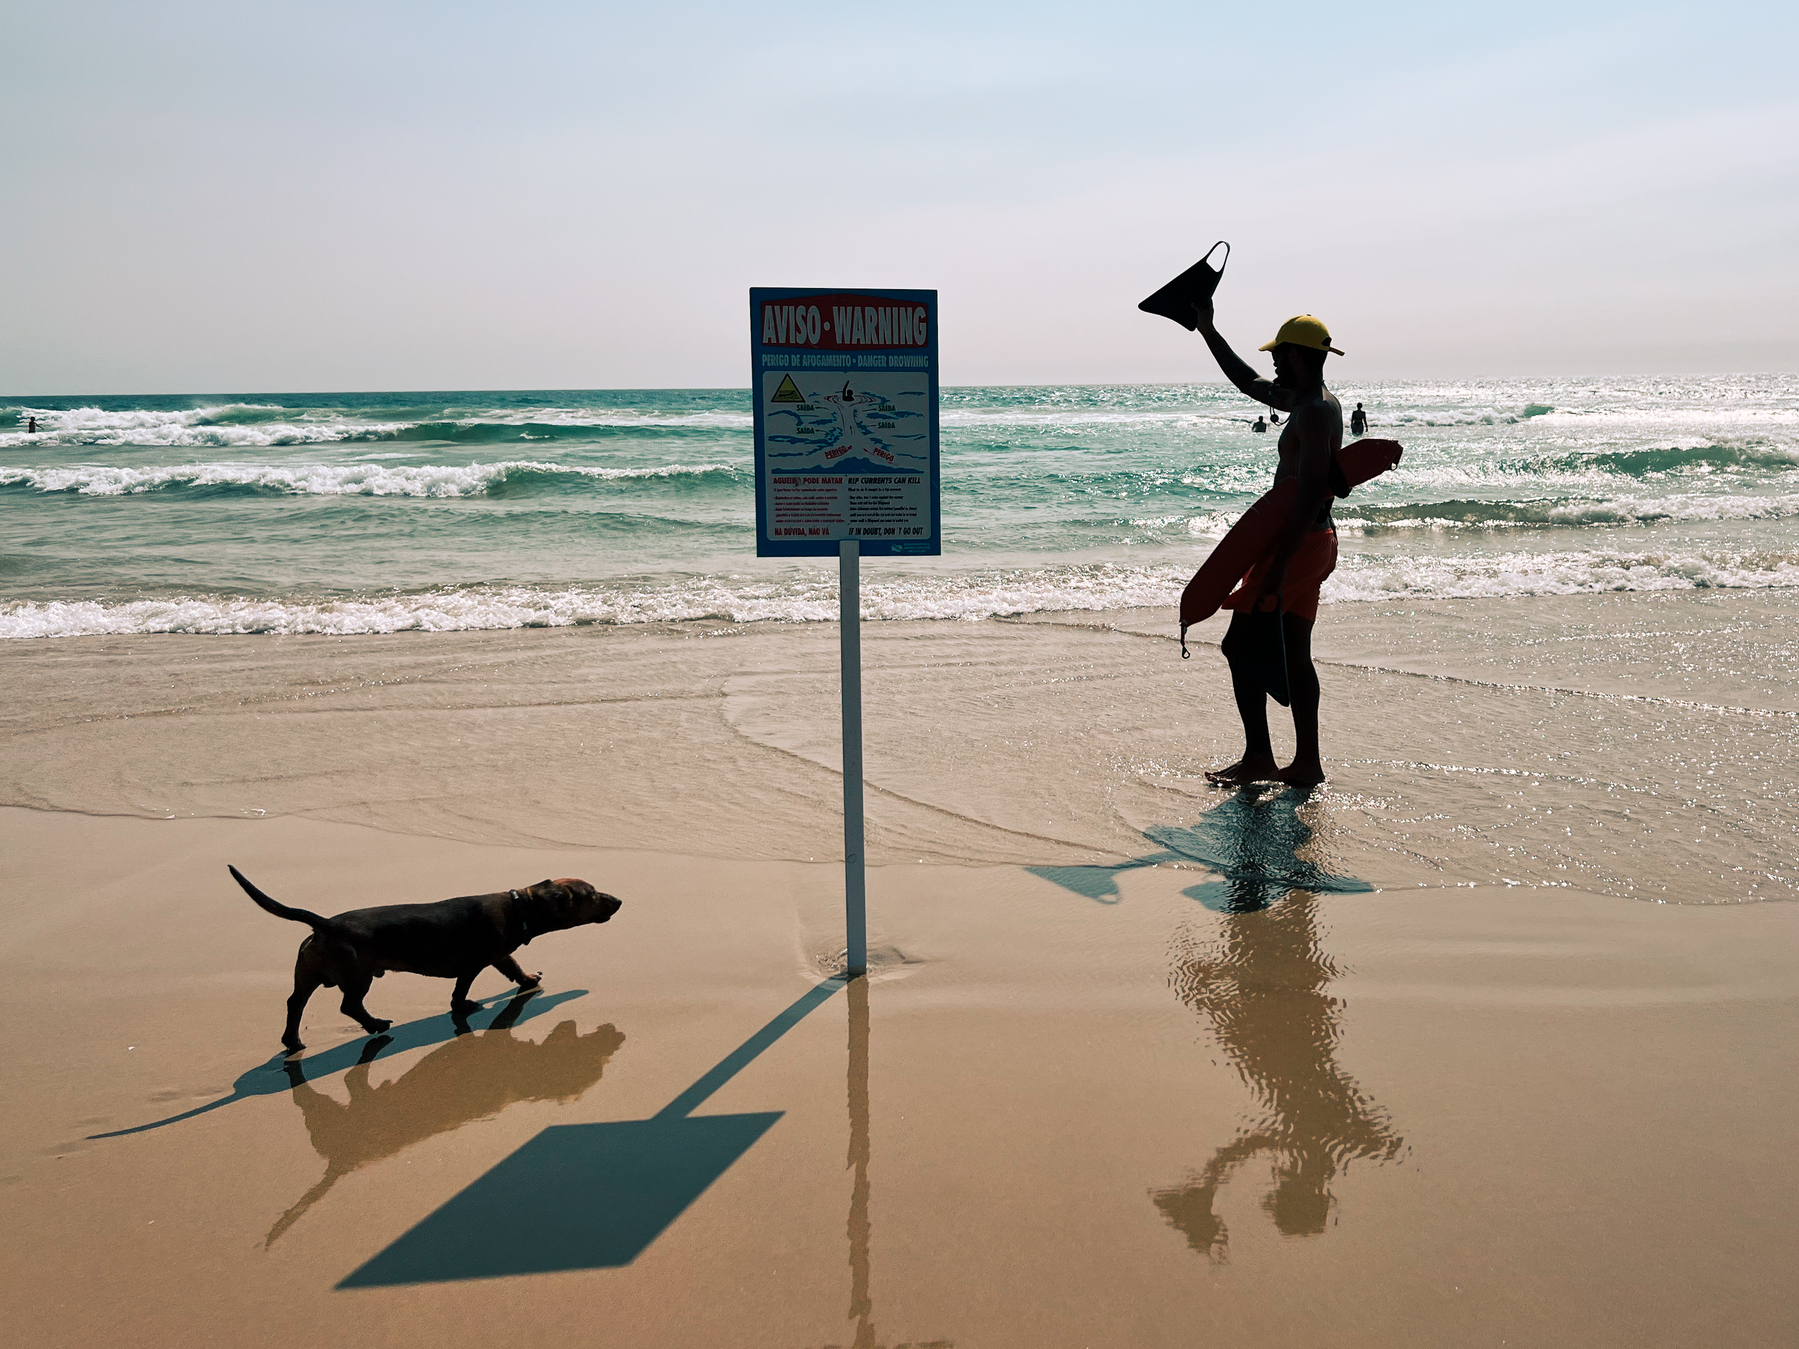 A lifeguard warns a swimmer (not in the photo), while a dog looks on. There’s a rip tide warning stuck in the sand. The sea in the back. 